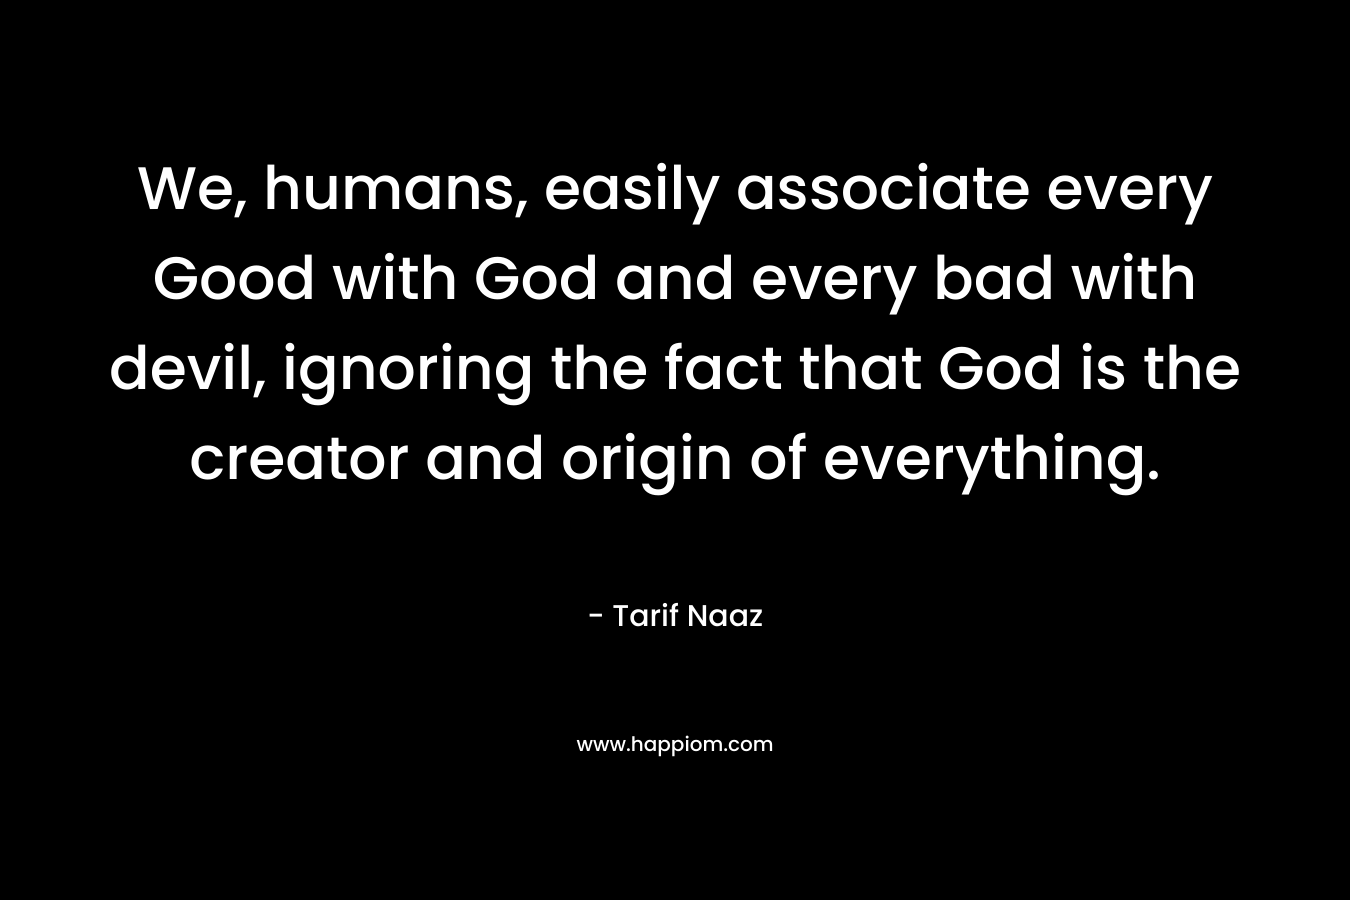 We, humans, easily associate every Good with God and every bad with devil, ignoring the fact that God is the creator and origin of everything.